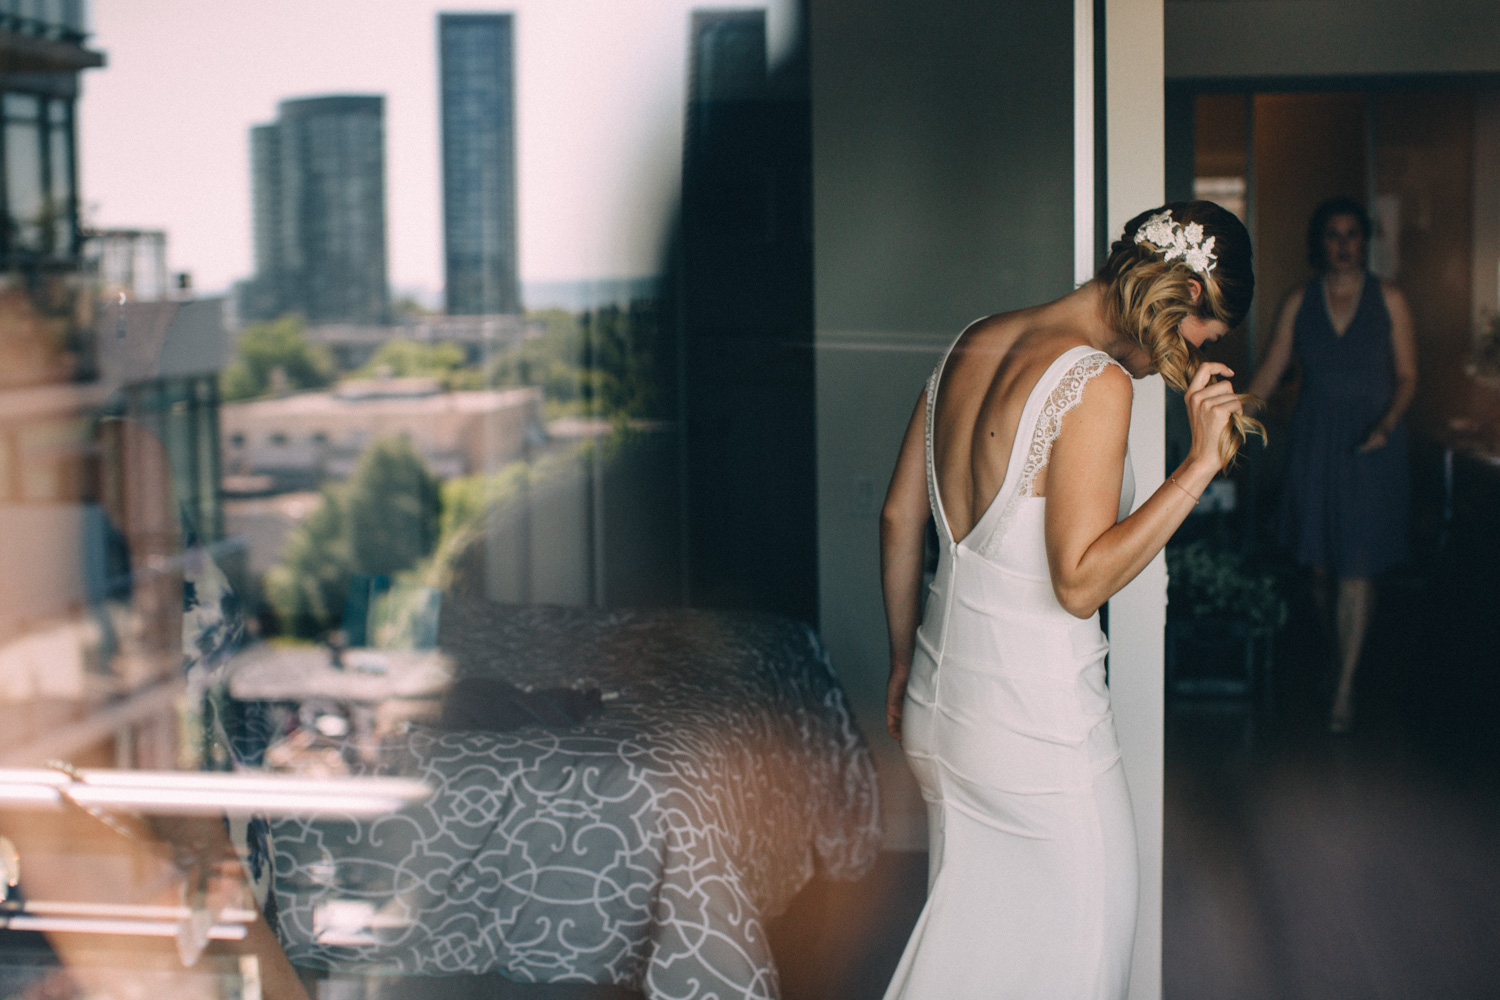 steam-whistle-brewery-wedding-photos-toronto-wedding-photography-by-sam-wong-of-artanis-collective_01015